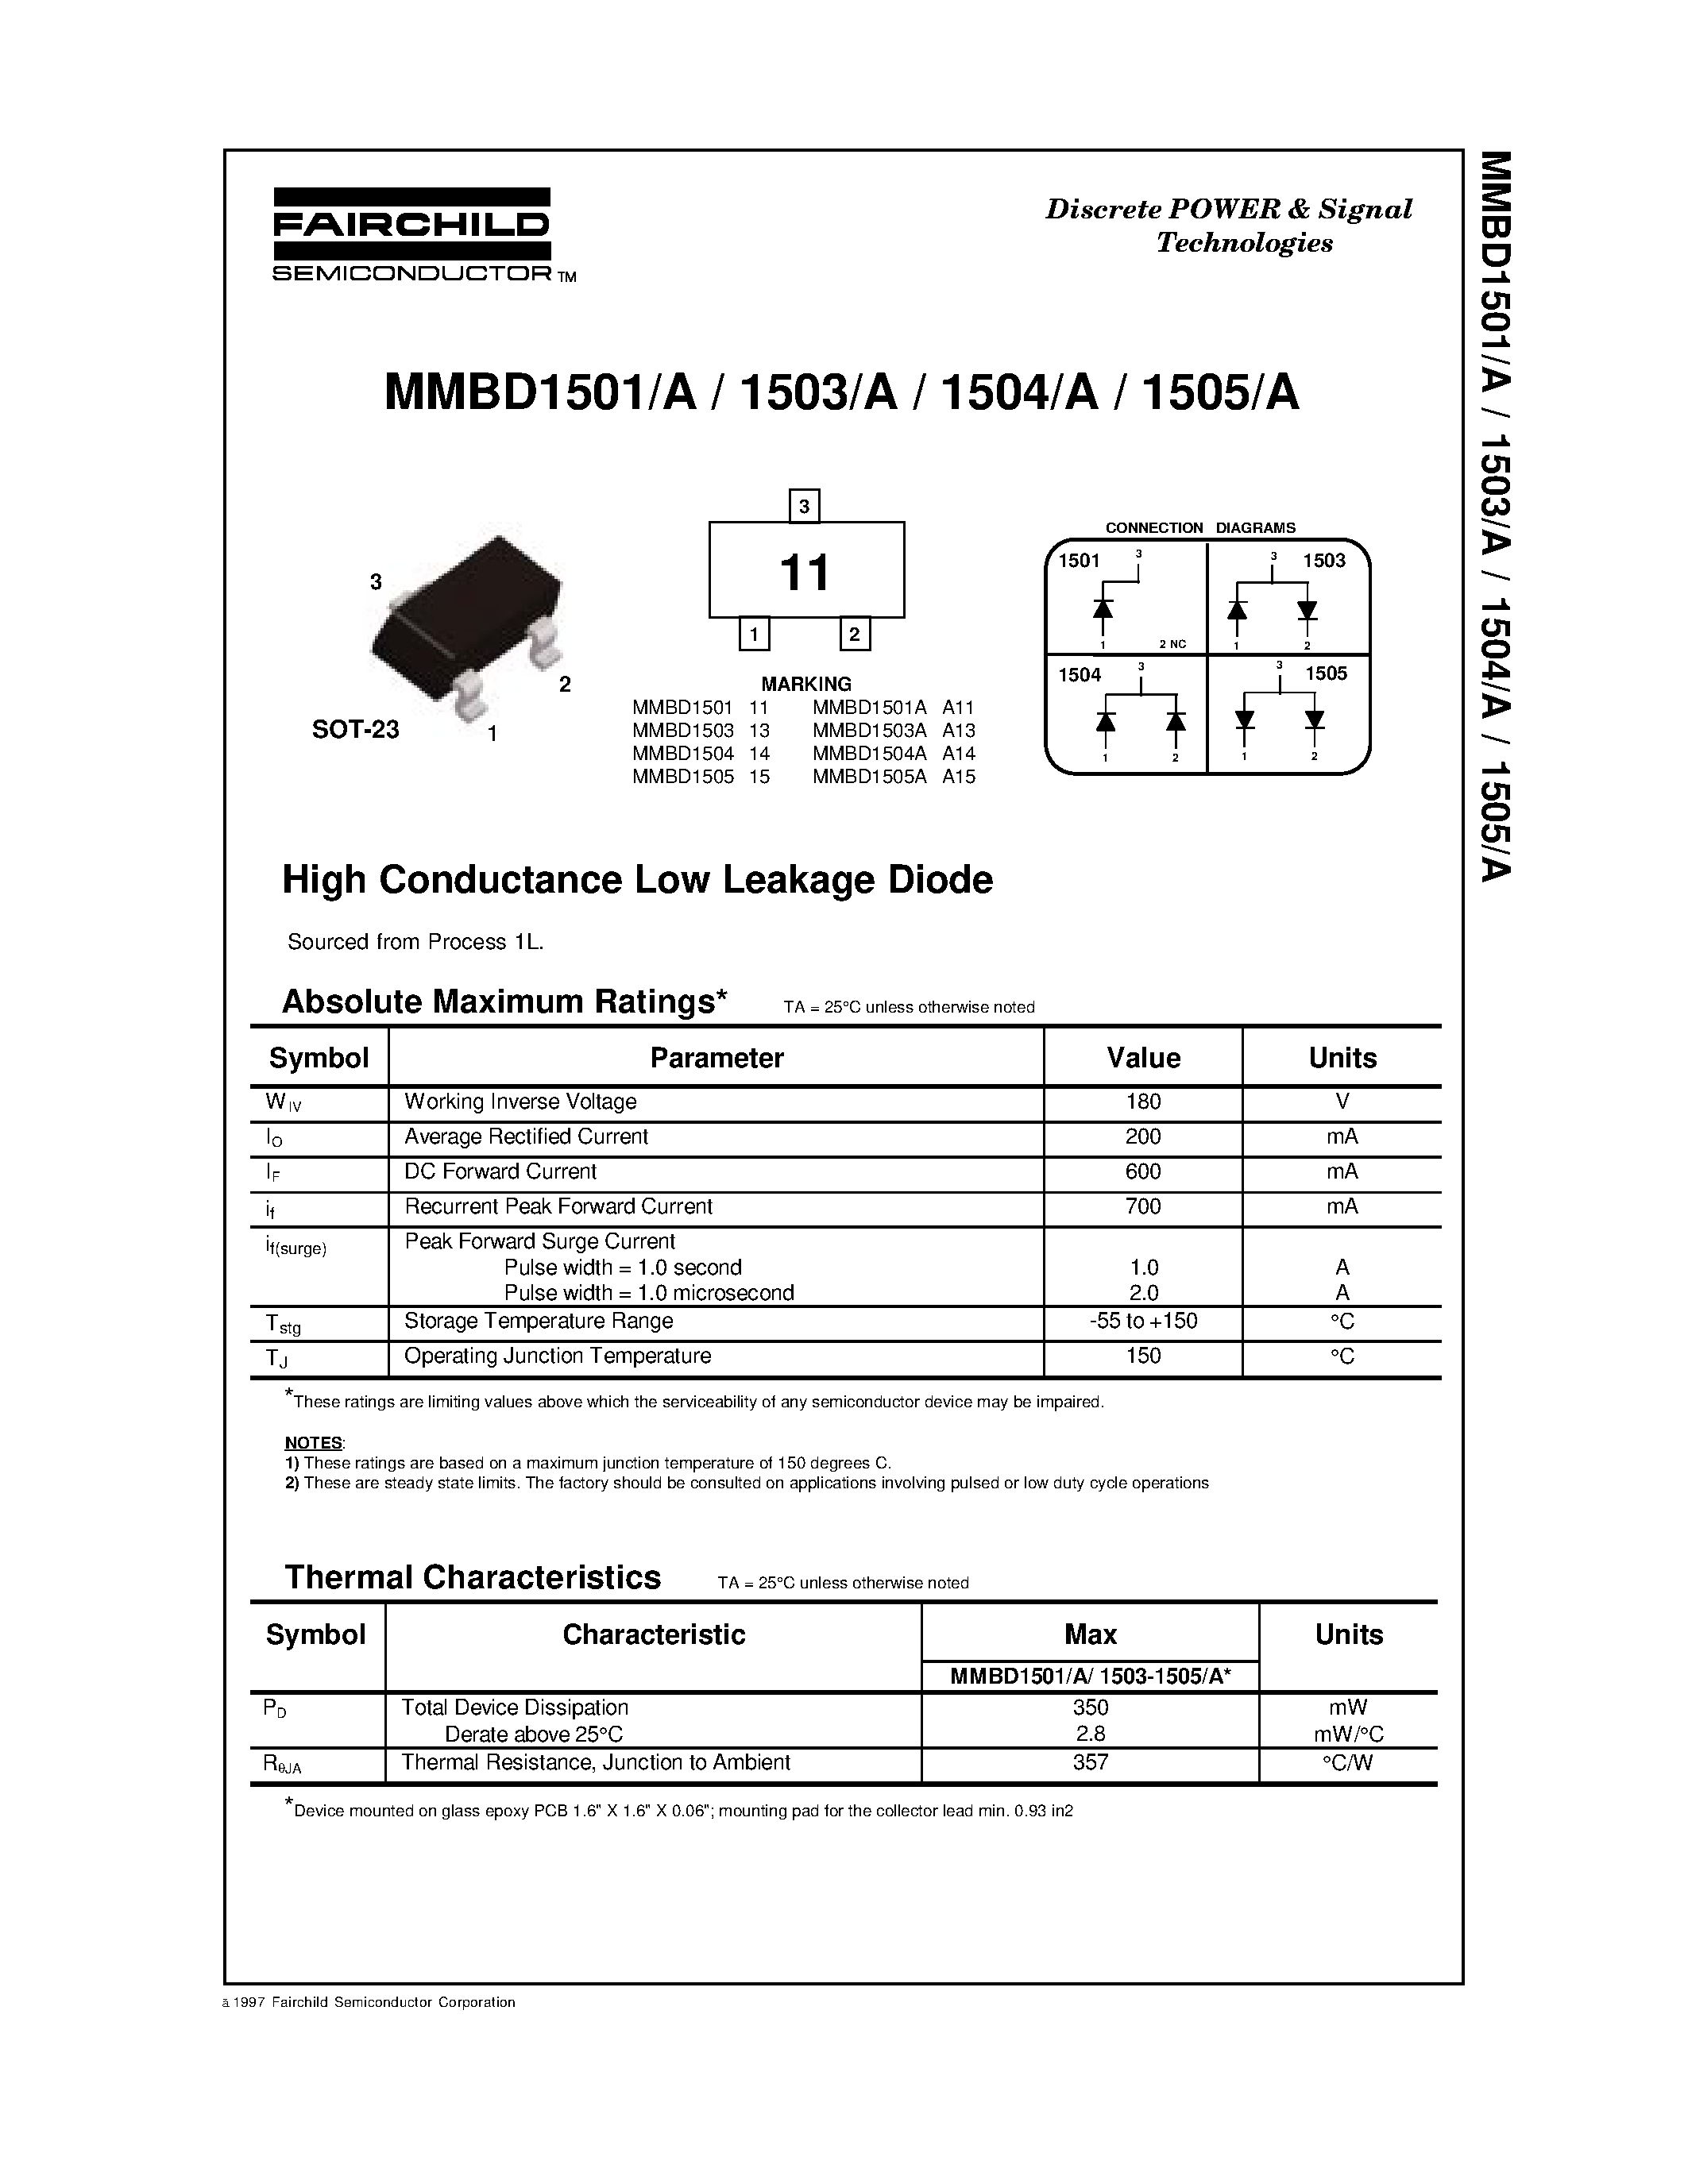 Даташит MMBD1501A - High Conductance Low Leakage Diode страница 1